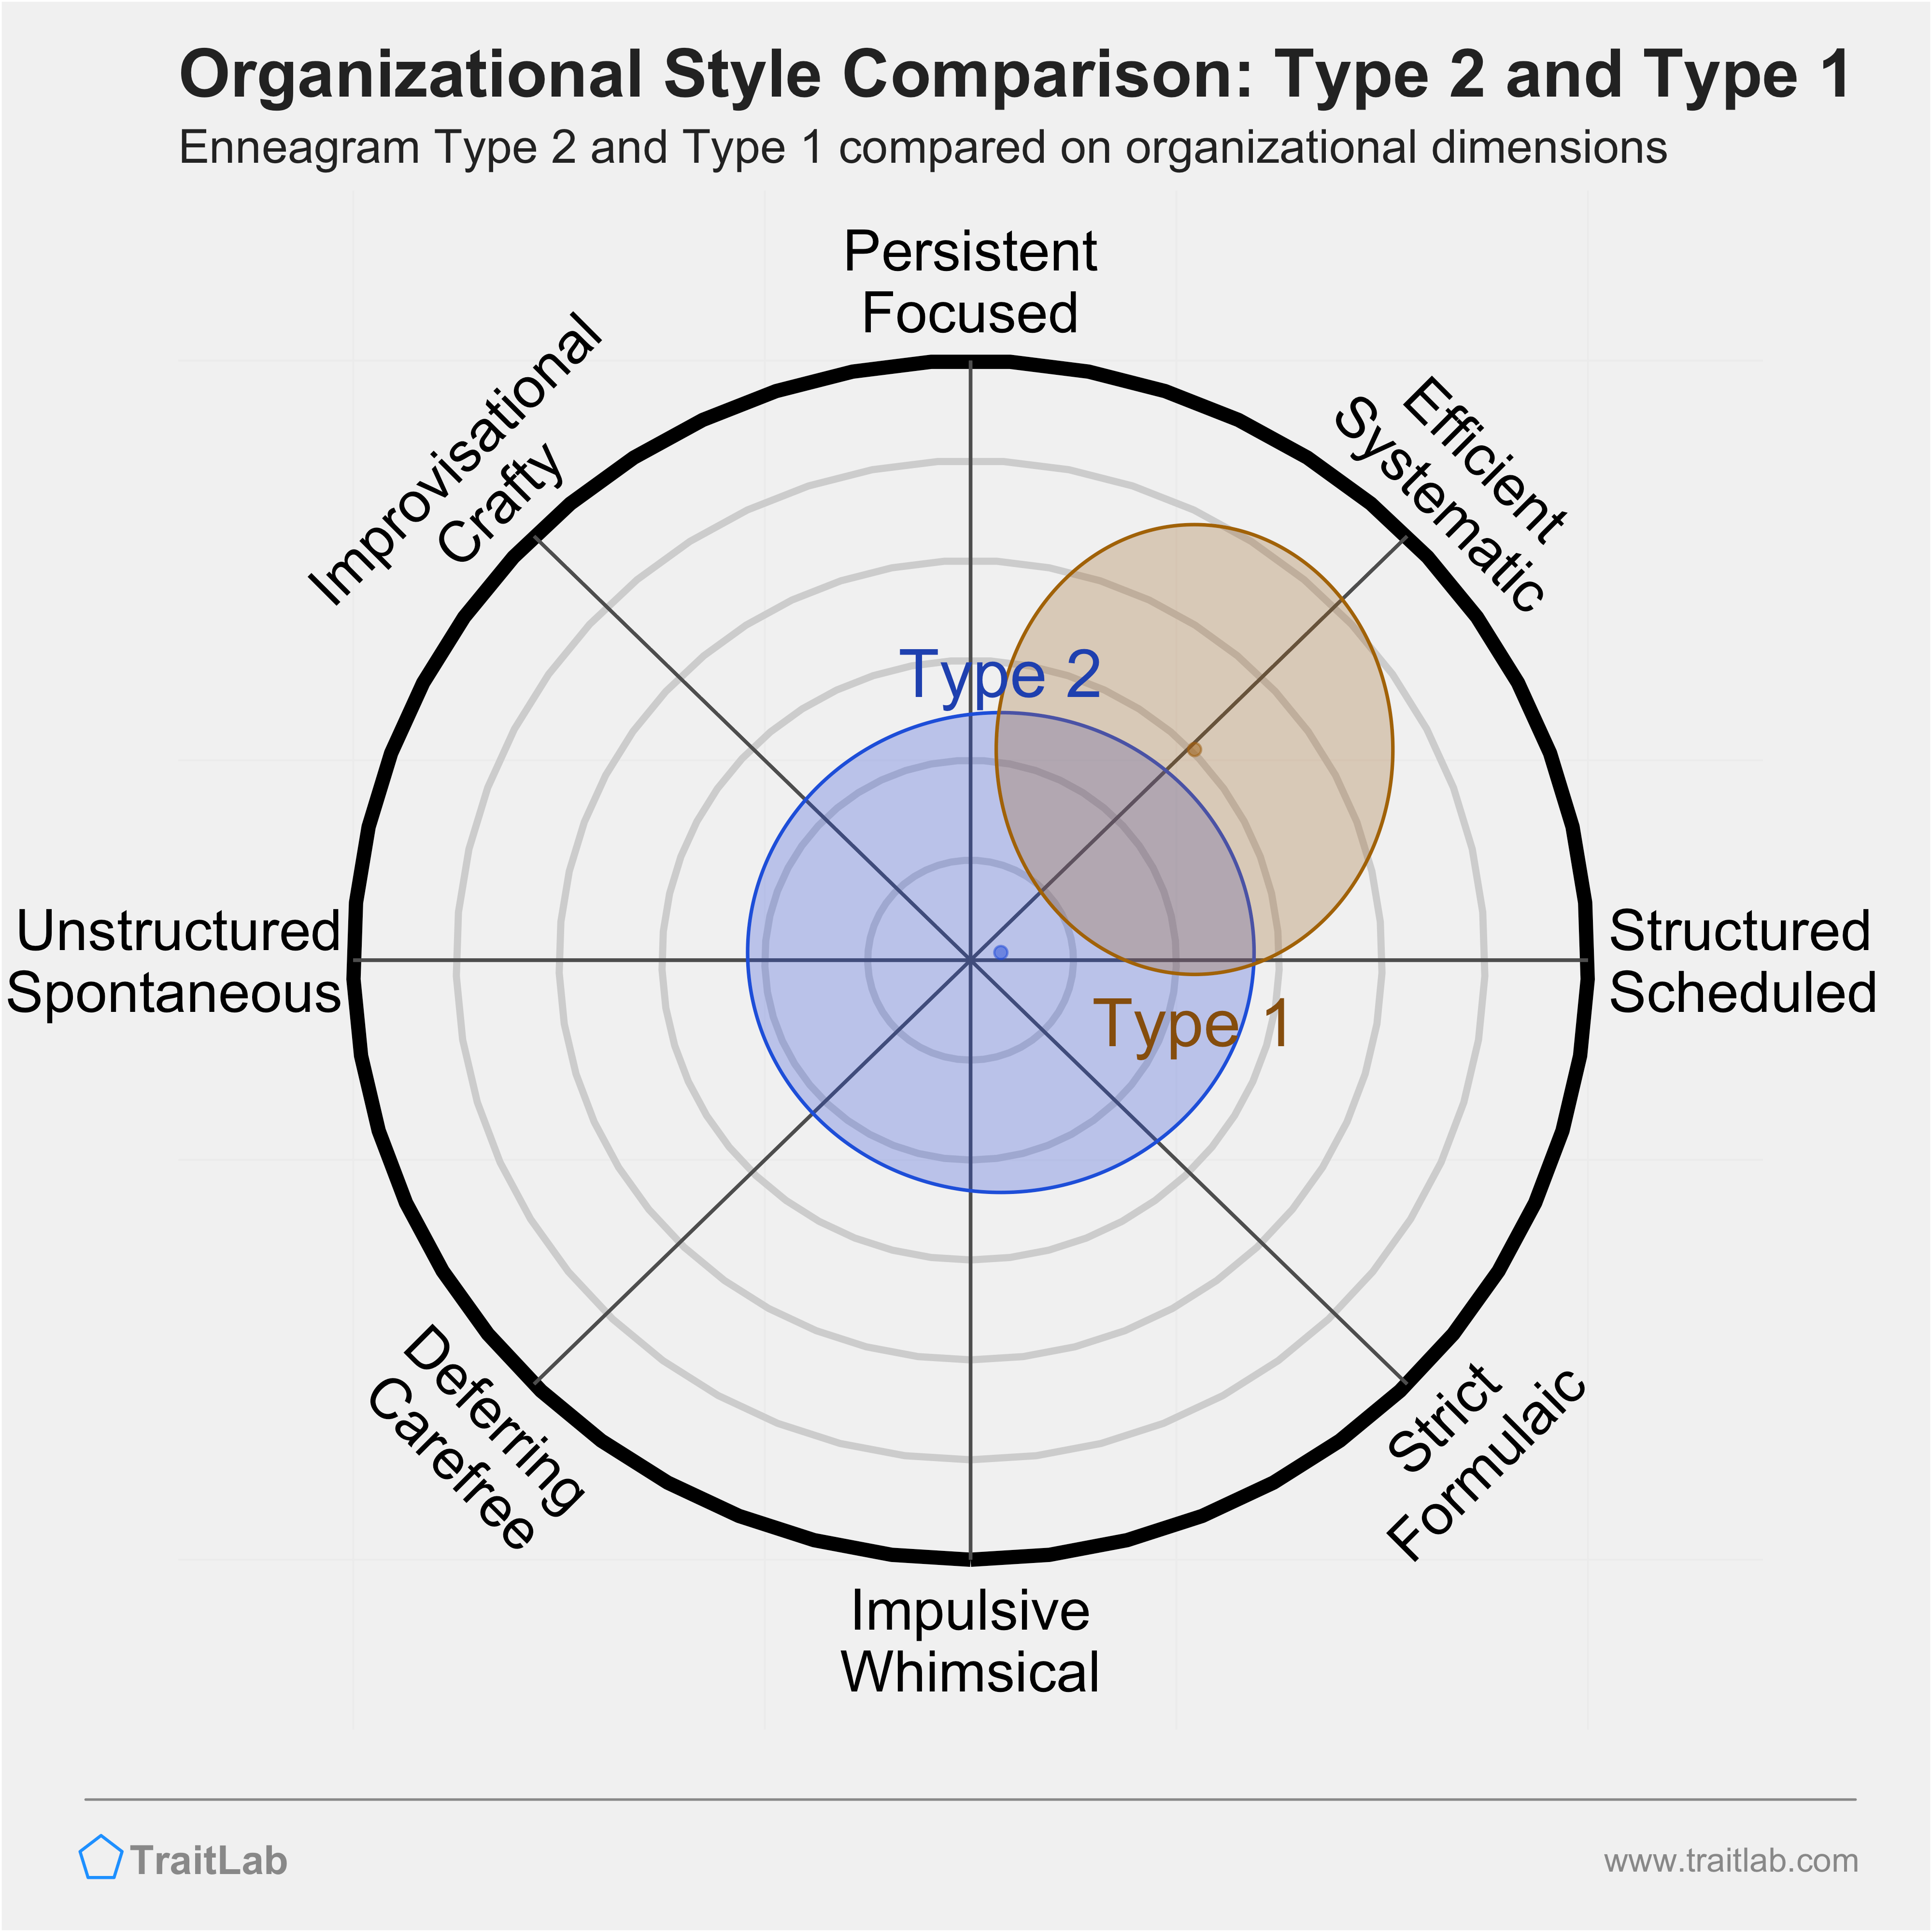 Type 2 and Type 1 comparison across organizational dimensions